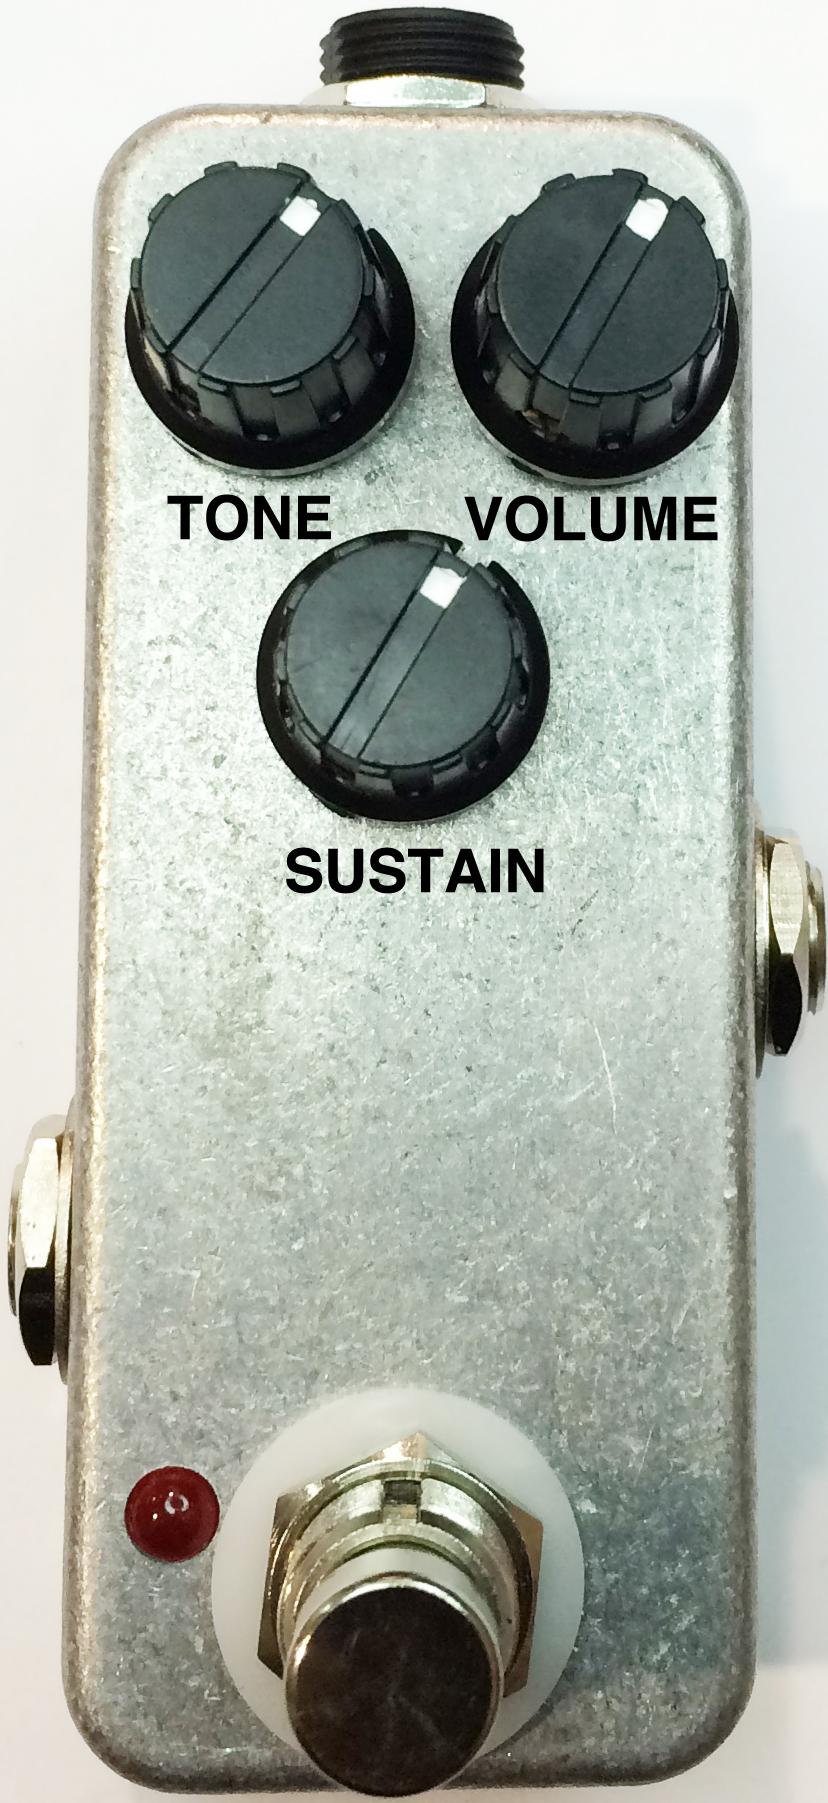 Operating Overview VOL: Controls overall output volume. SUSTAIN: Controls the amount of distortion.